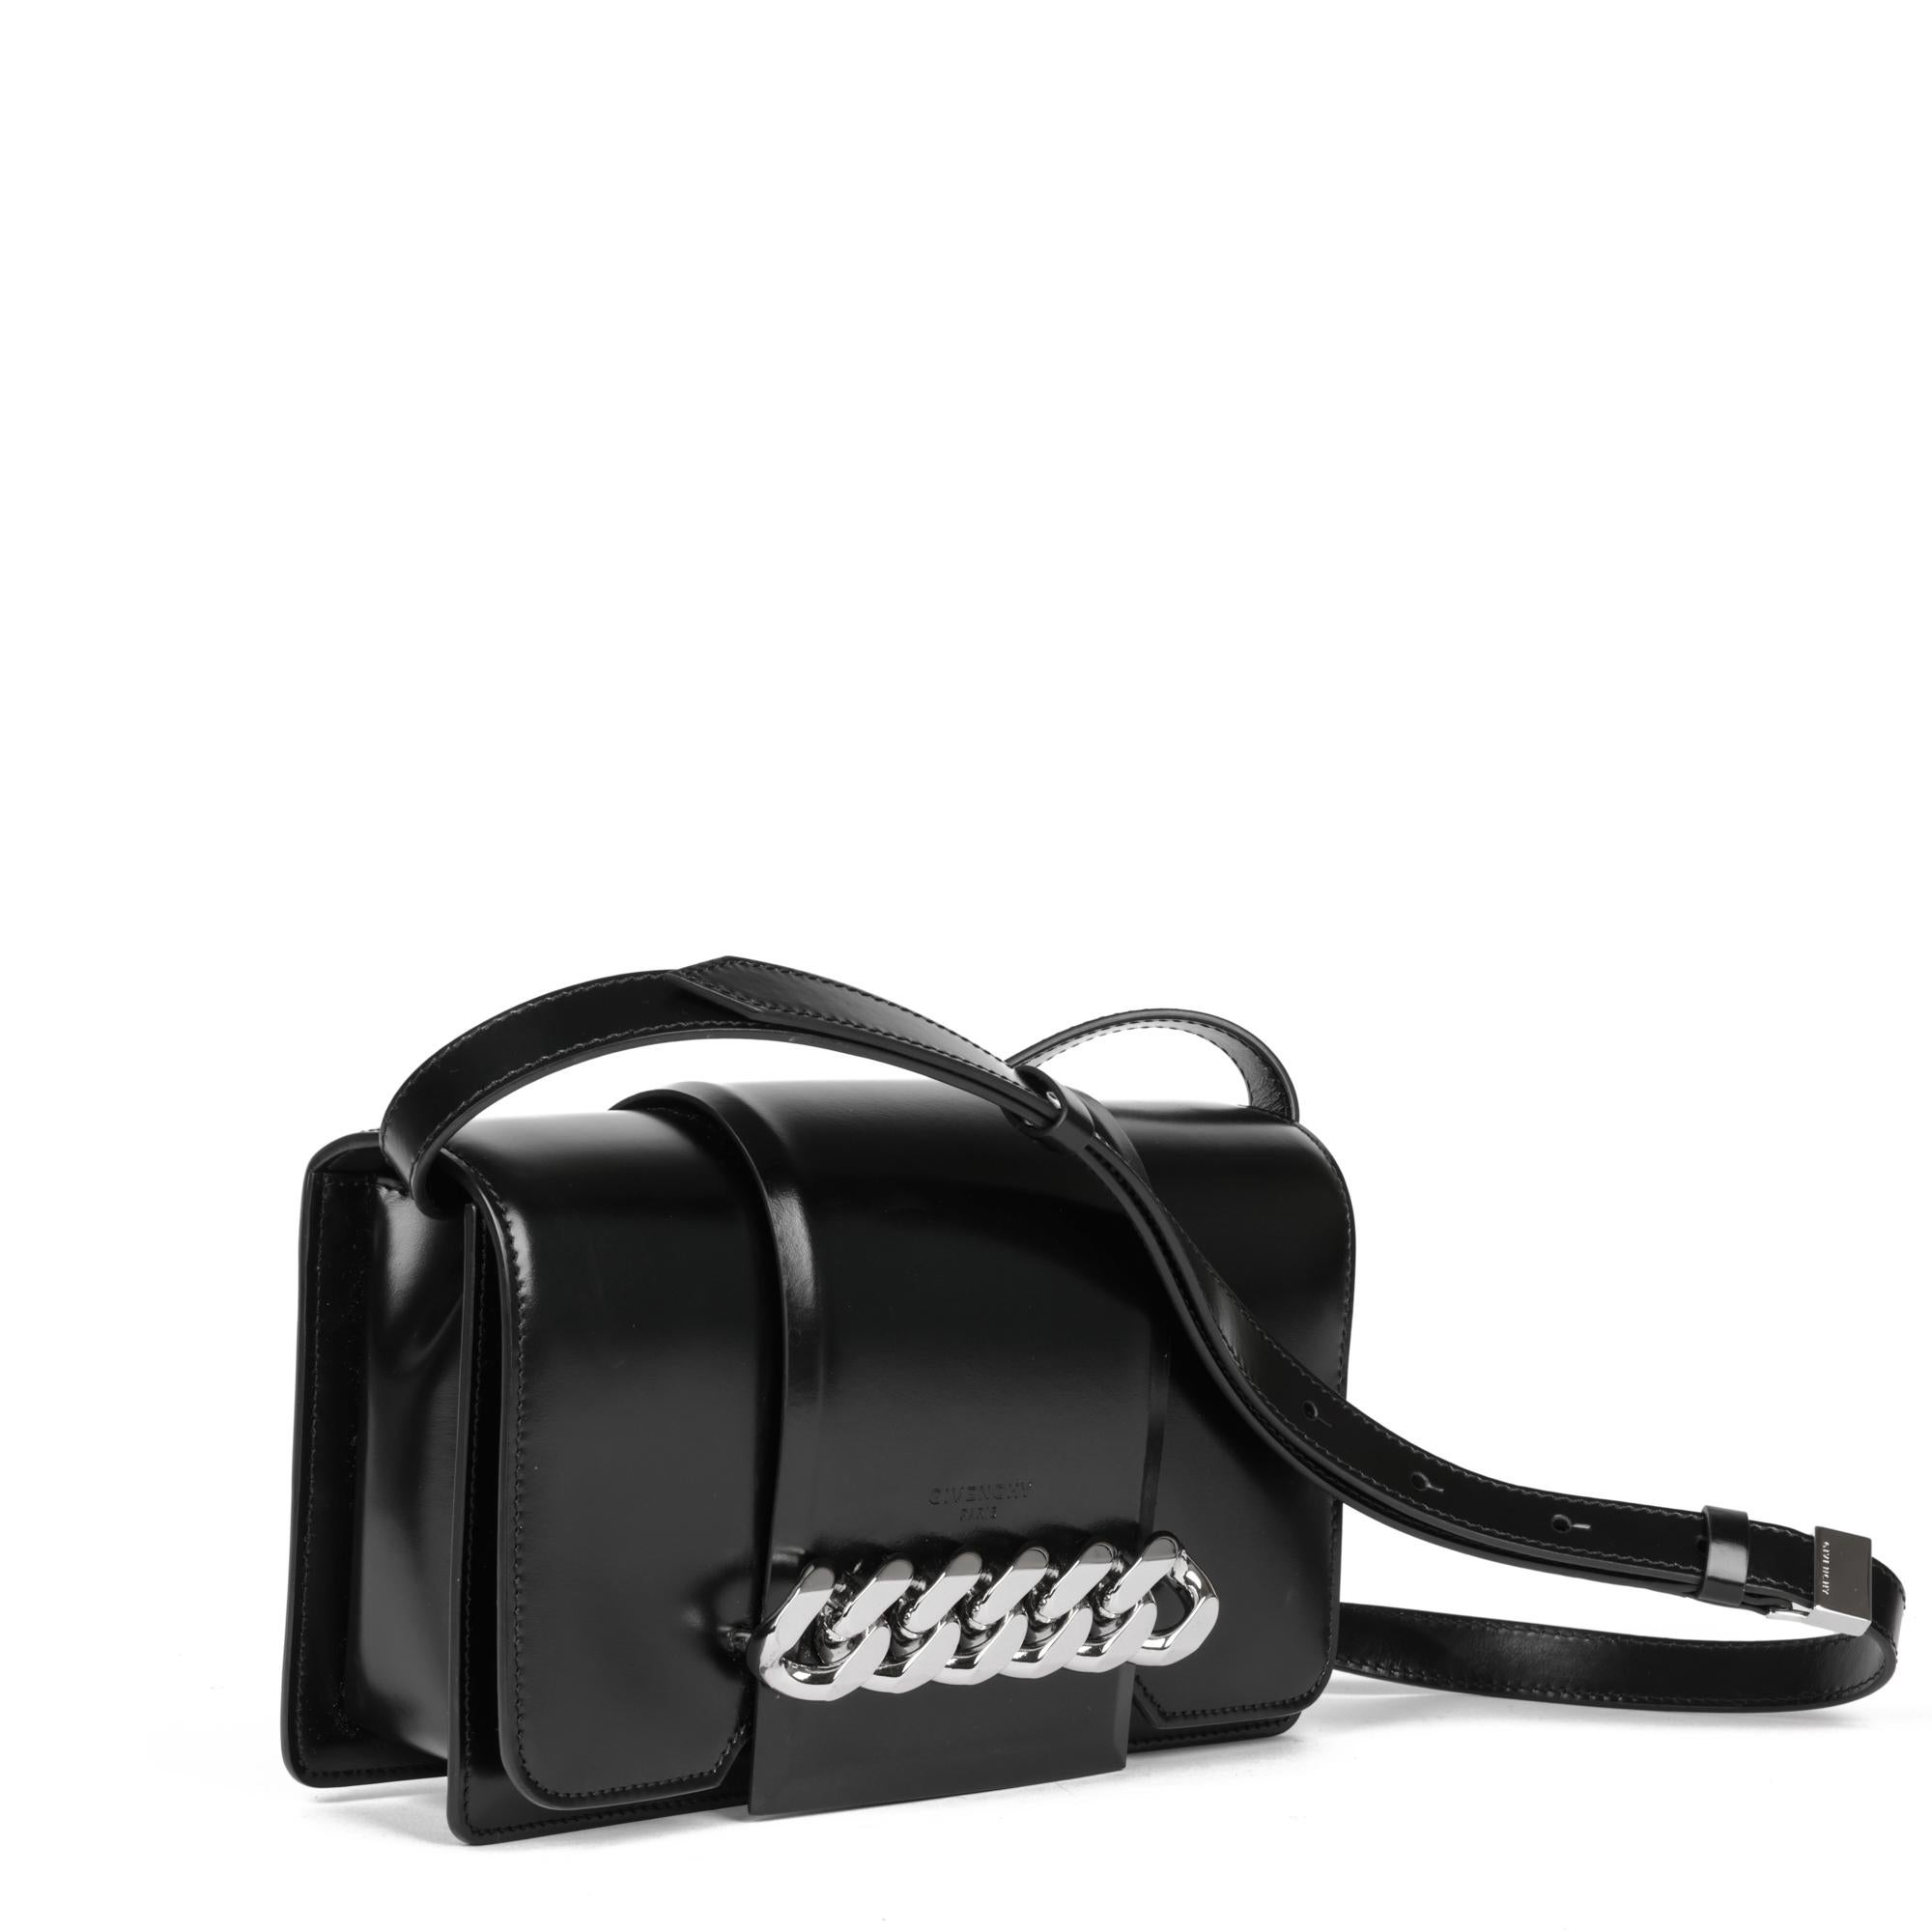 GIVENCHY
Black Smooth Calfskin Leather Infinity Flap Bag

Serial Number: MA I 0187
Age (Circa): 2017
Accompanied By: Dust Bag
Authenticity Details: Date Stamp (Made in Italy) 
Gender: Ladies
Type: Shoulder, Crossbody

Colour: Black
Hardware: